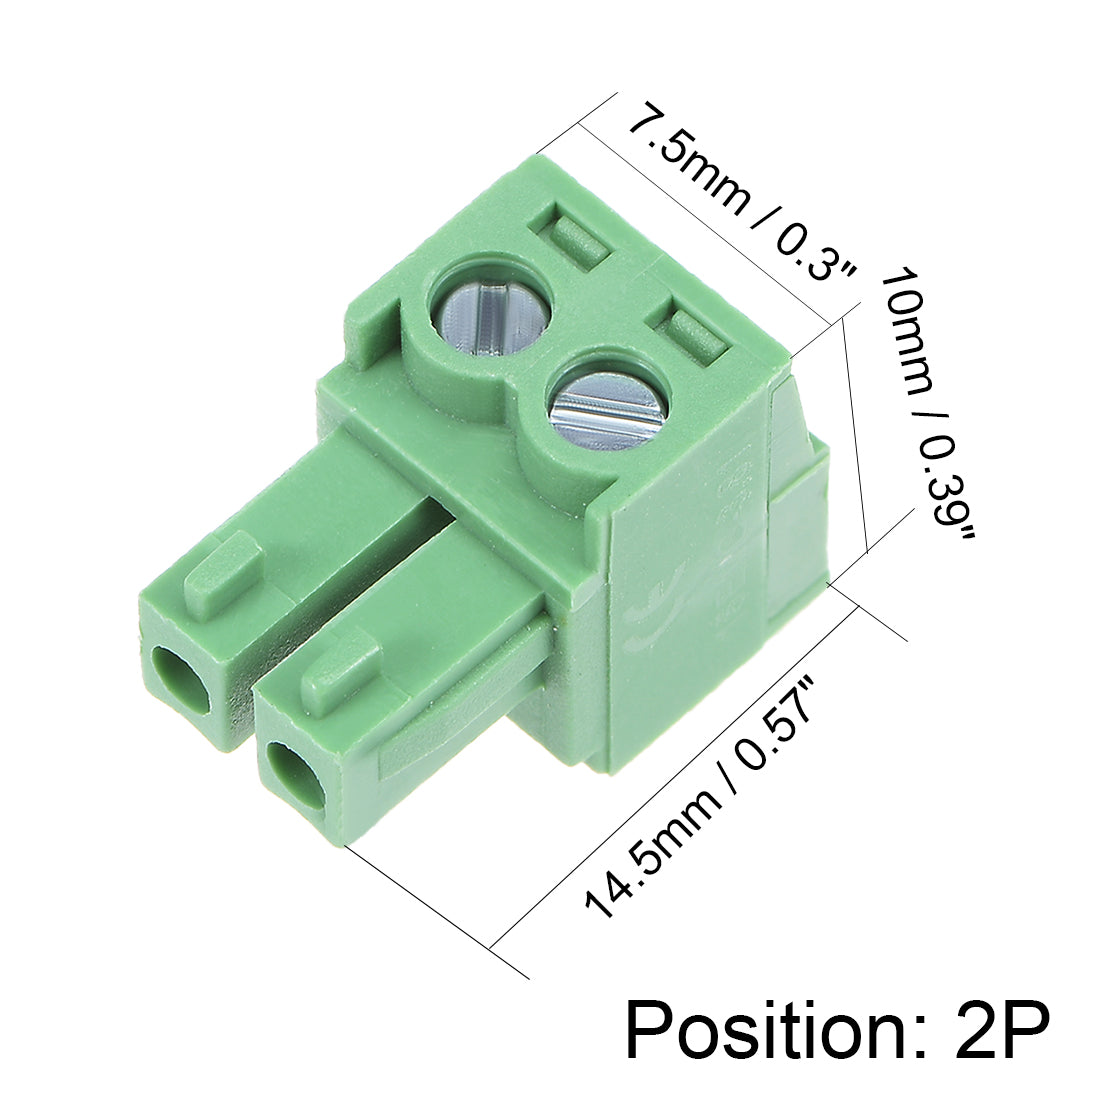 uxcell Uxcell 25Pcs AC300V 10A 3.81mm Pitch 2P Flat Angle Needle Seat Insert-In PCB Terminal Block Connector green